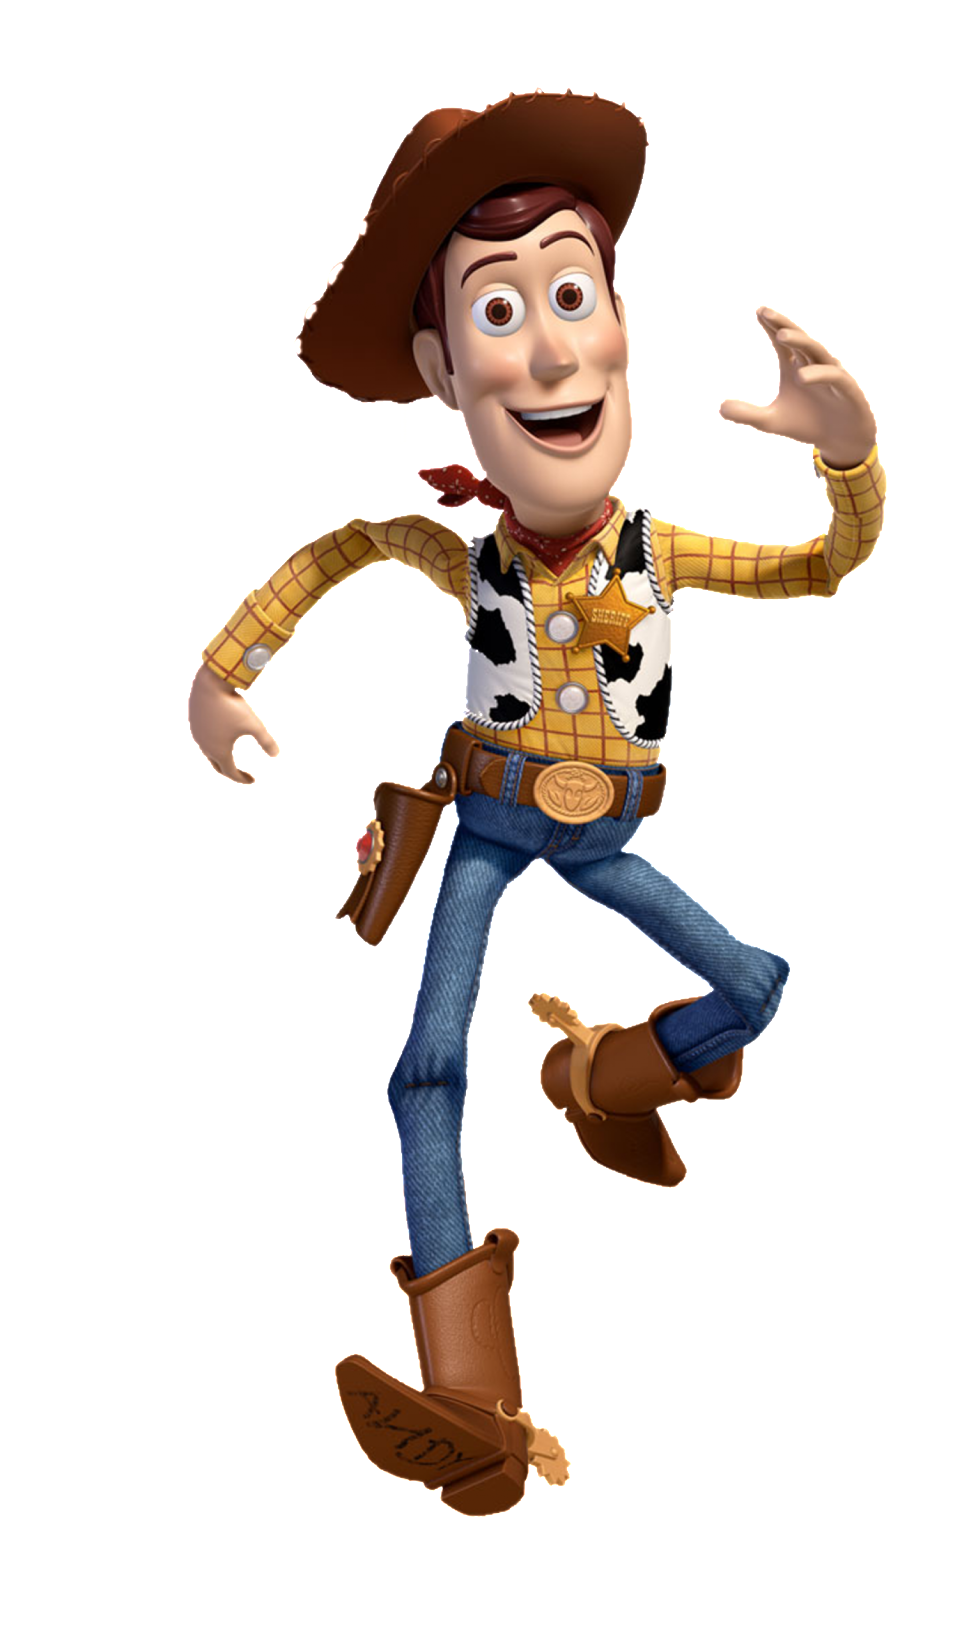 Woody From Toy Story (962x1632)